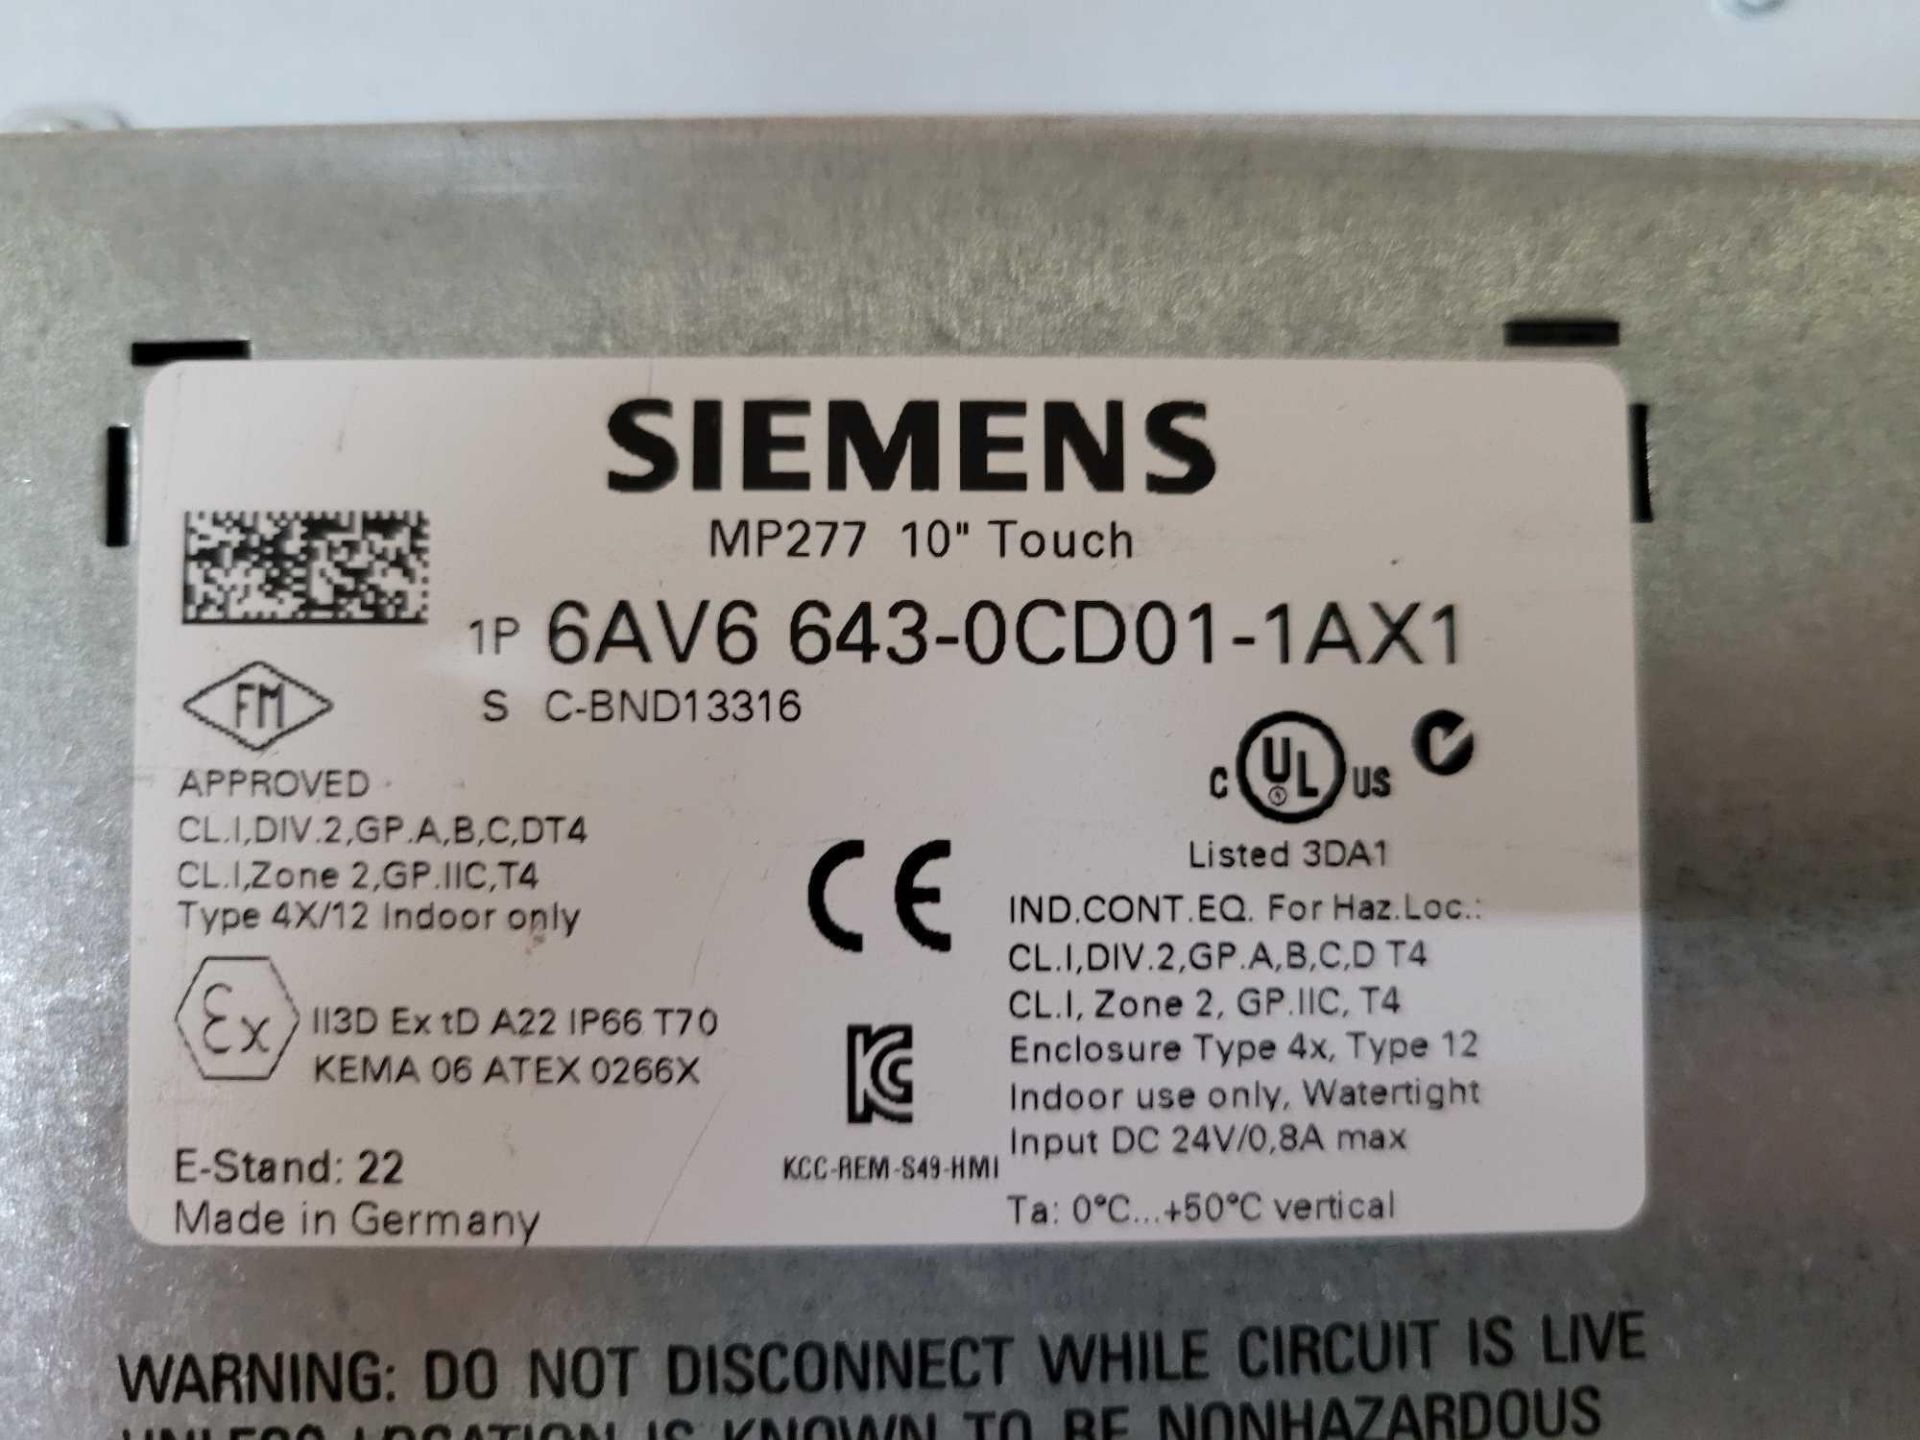 SIEMENS 6AV6 643-0CD01-1AX1 MP277 10" TOUCH SIMATIC MULTI PANEL SEE PICS SCRATCHED - Image 3 of 3